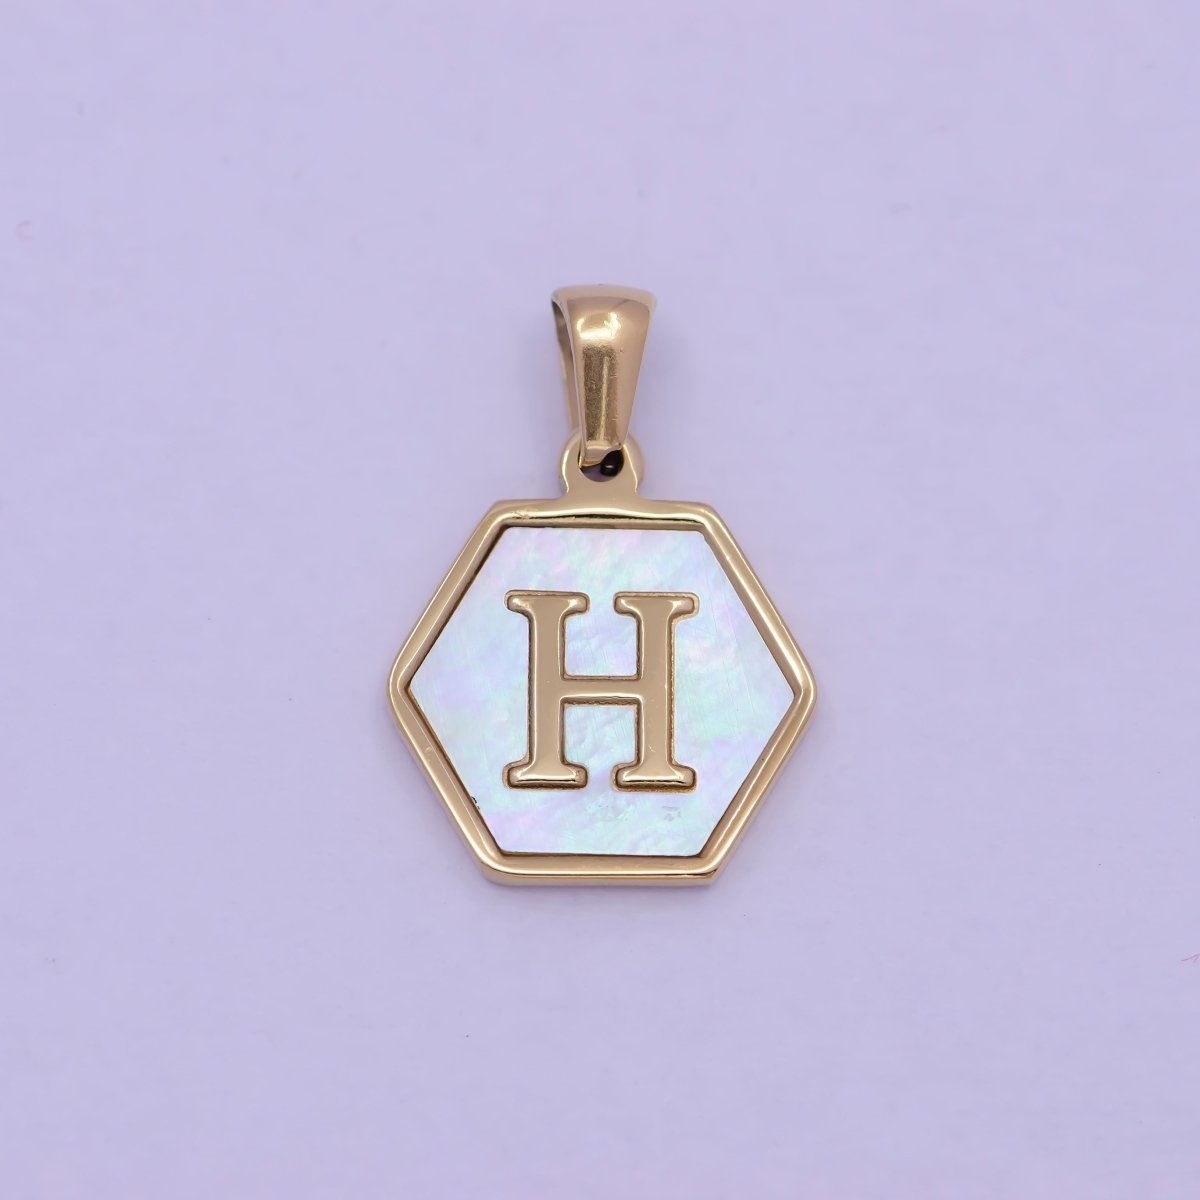 Gold Initial Letter Necklace Pendant Hexagon Alphabet Charm Mother of pearl Letter Minimalist Jewelry Shell Hexagon Pendant for Necklace BraceletW-340 to W-365 - DLUXCA